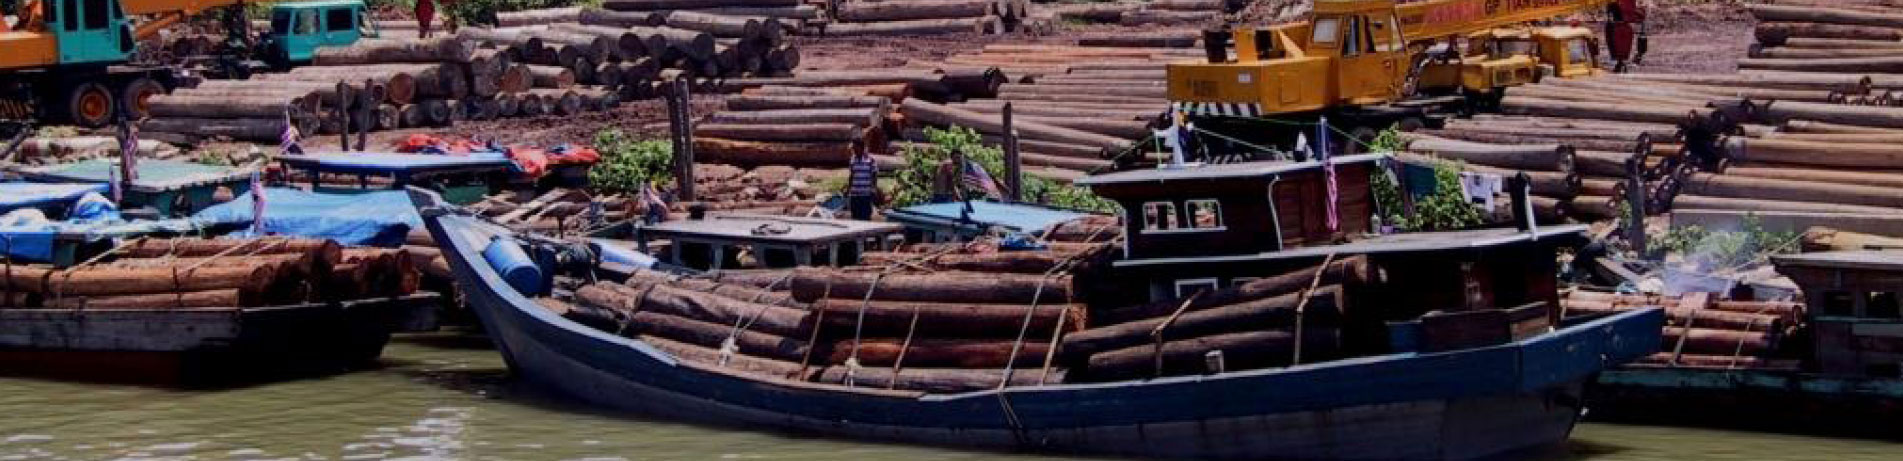 Illegal timber transported by boat, Malaysia